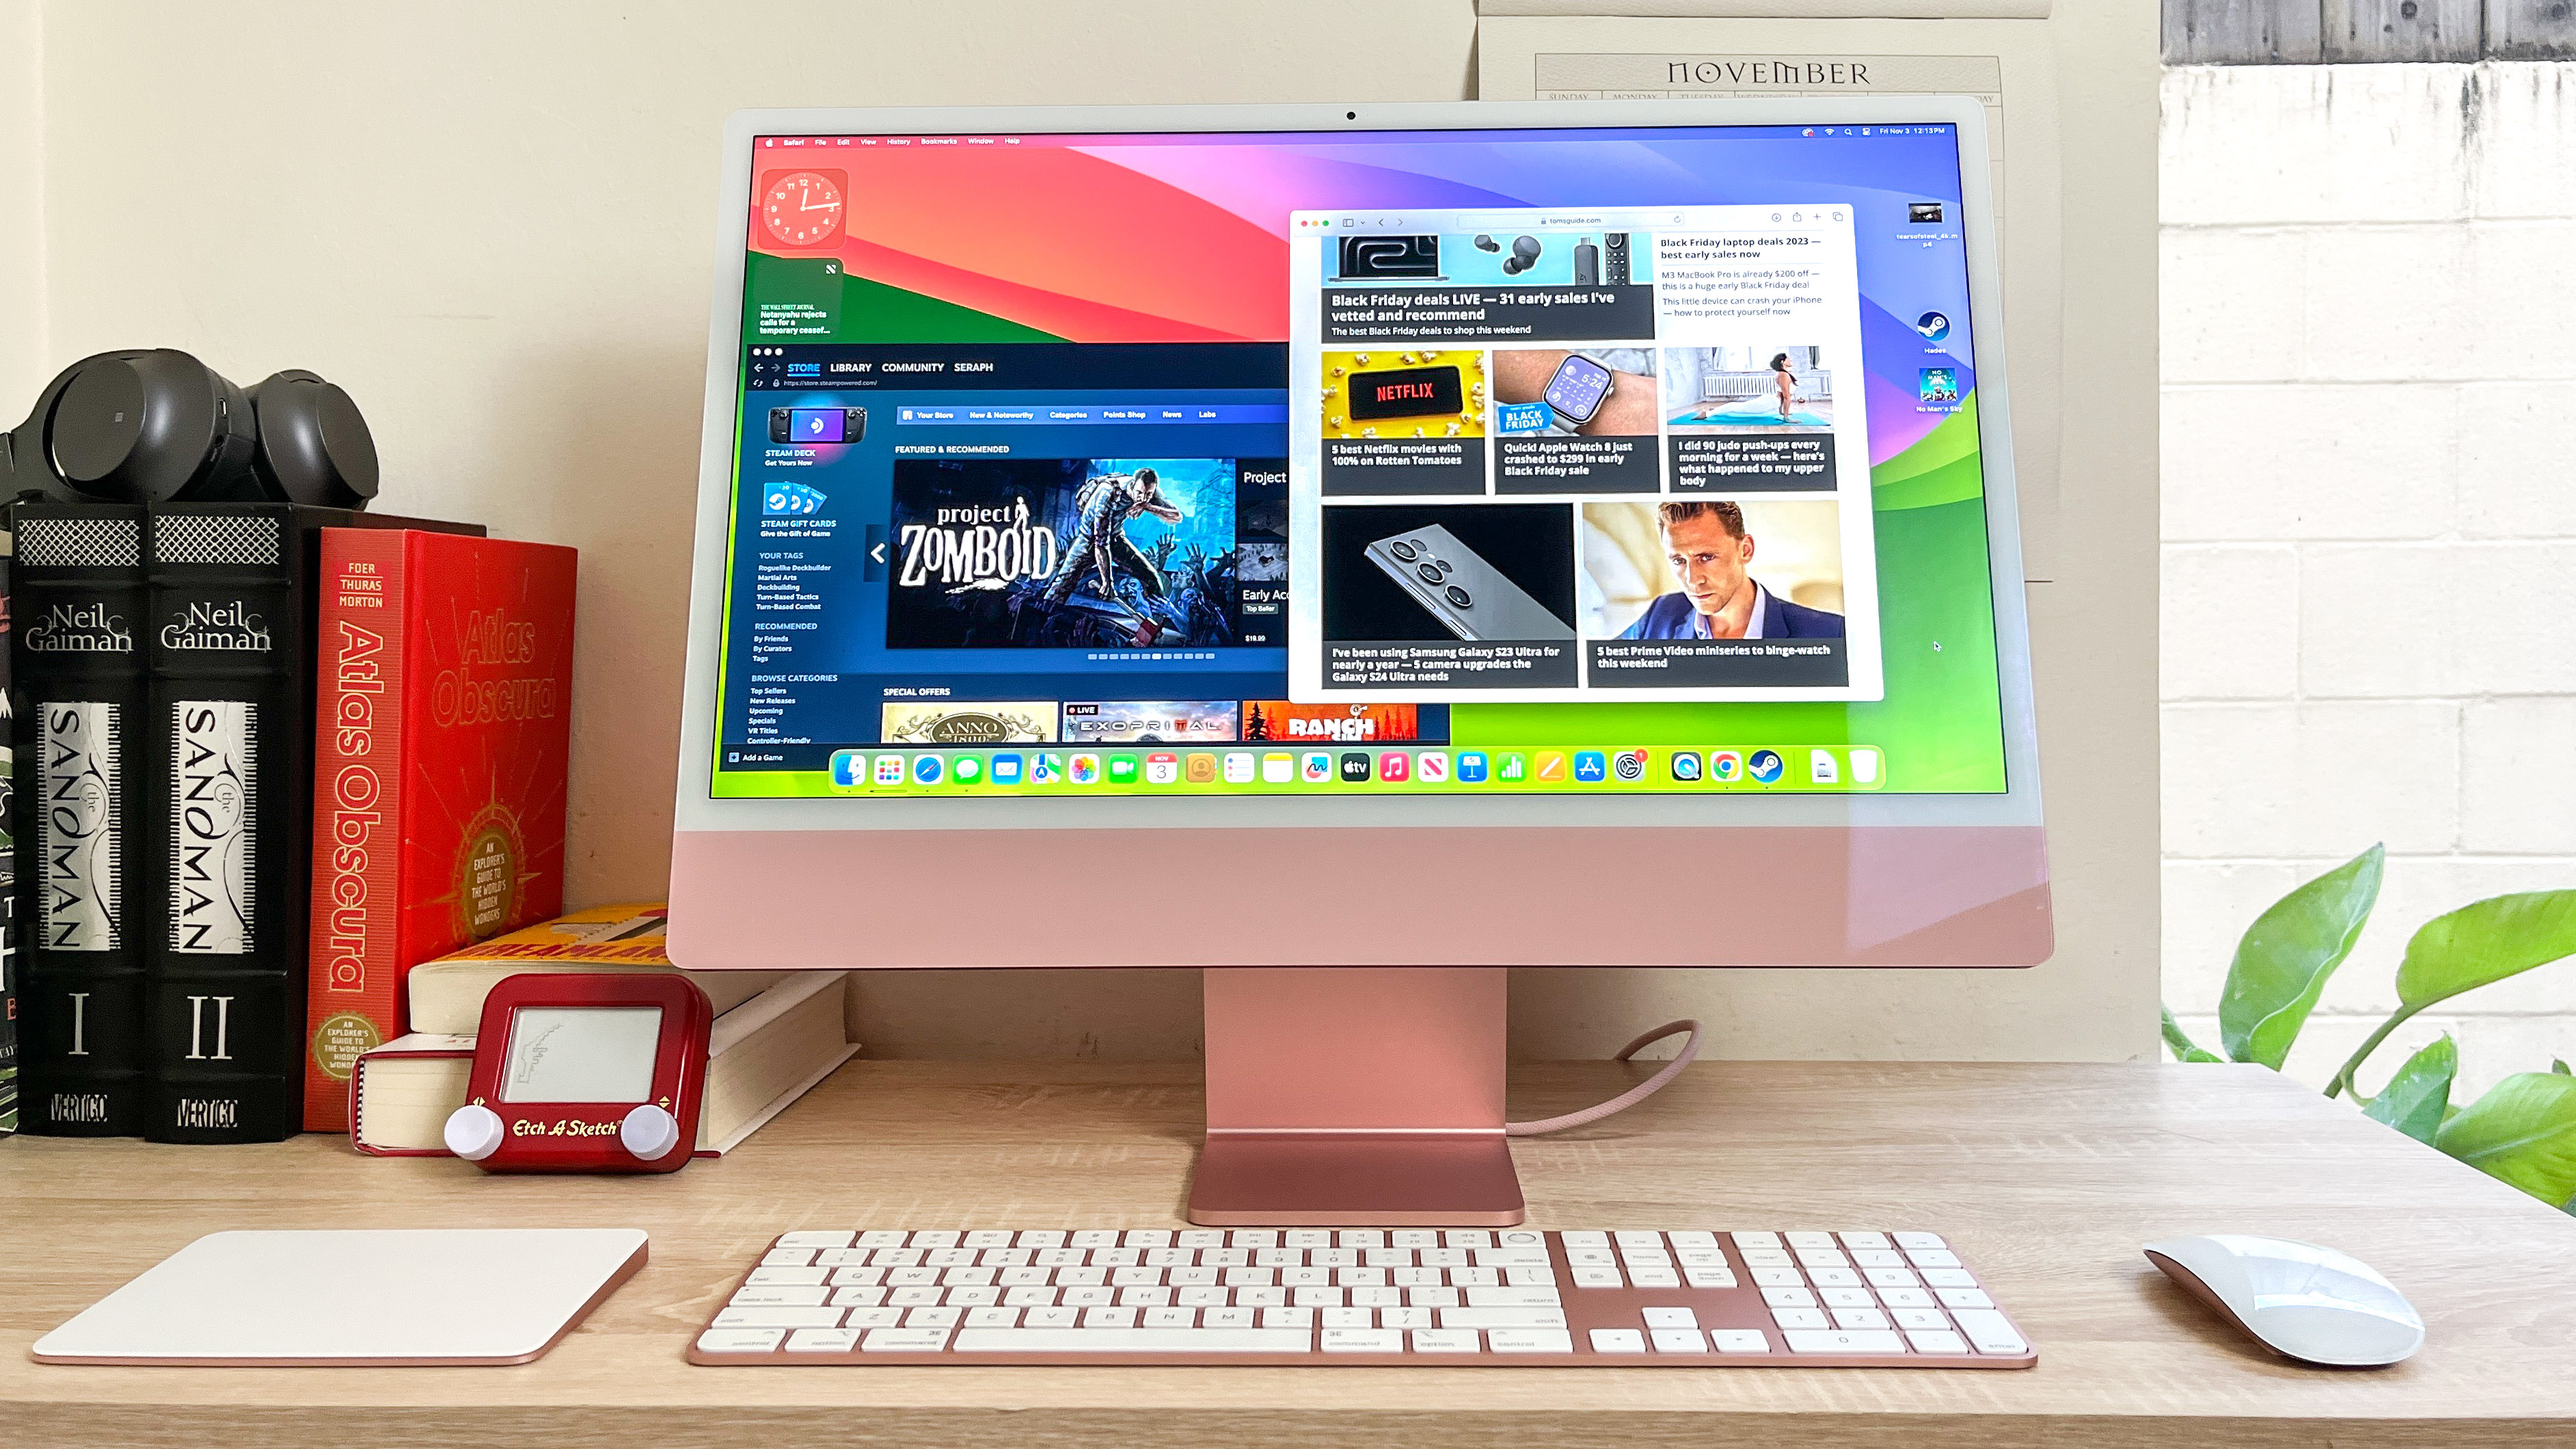 Dual Mac minis and Xbox play in gamer's workstation [Setups]